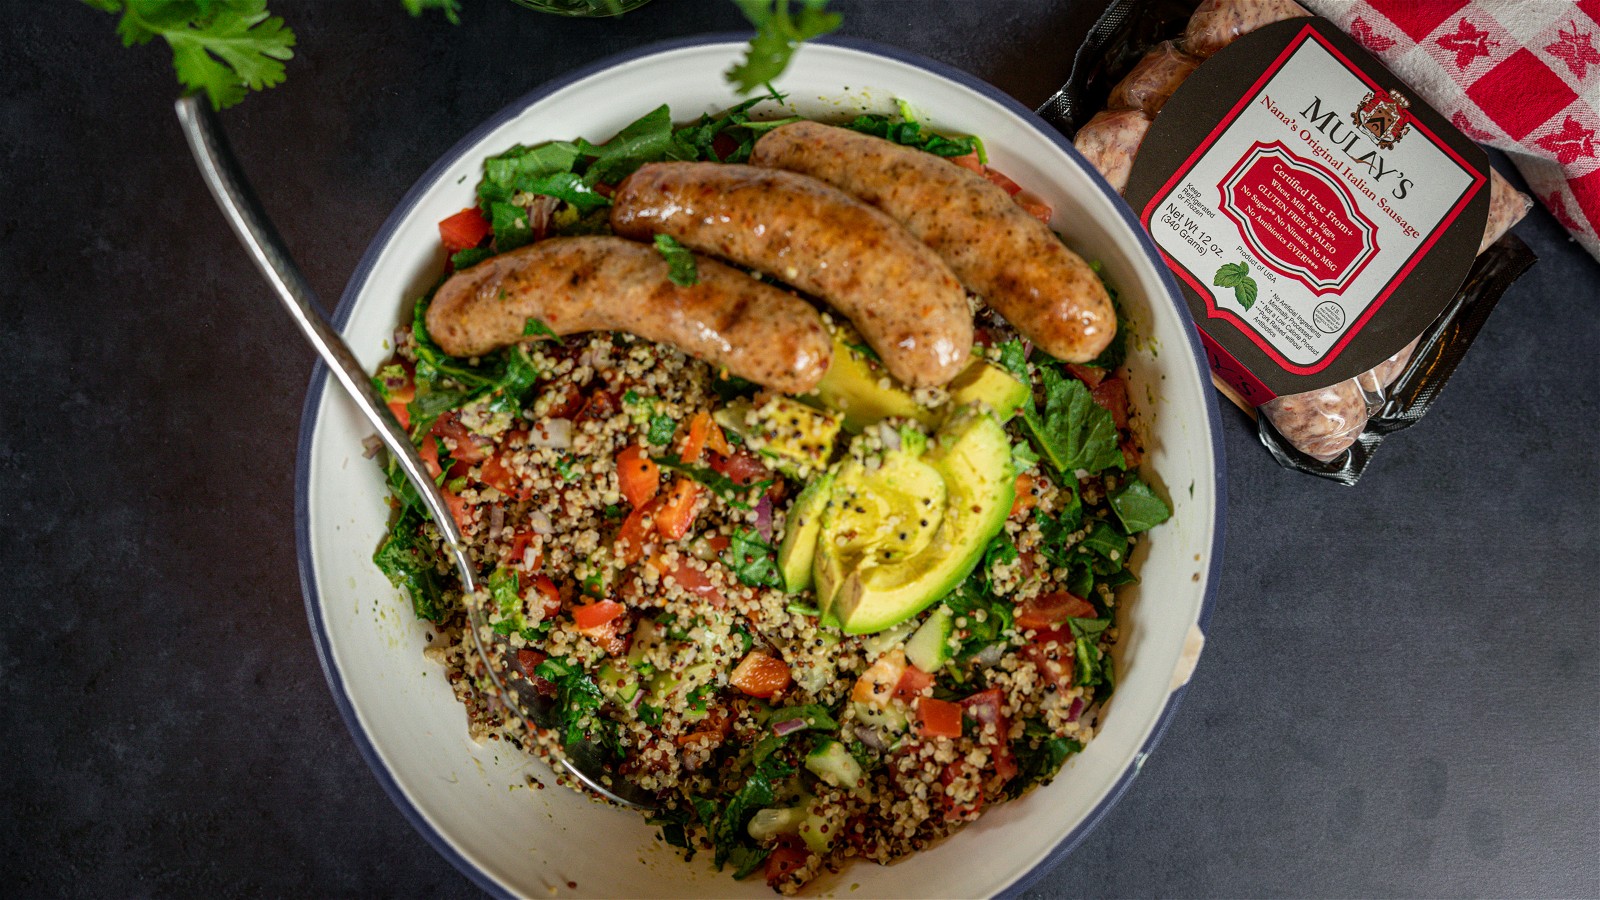 Image of Spicy Sausage, Tomato and Avocado Salad